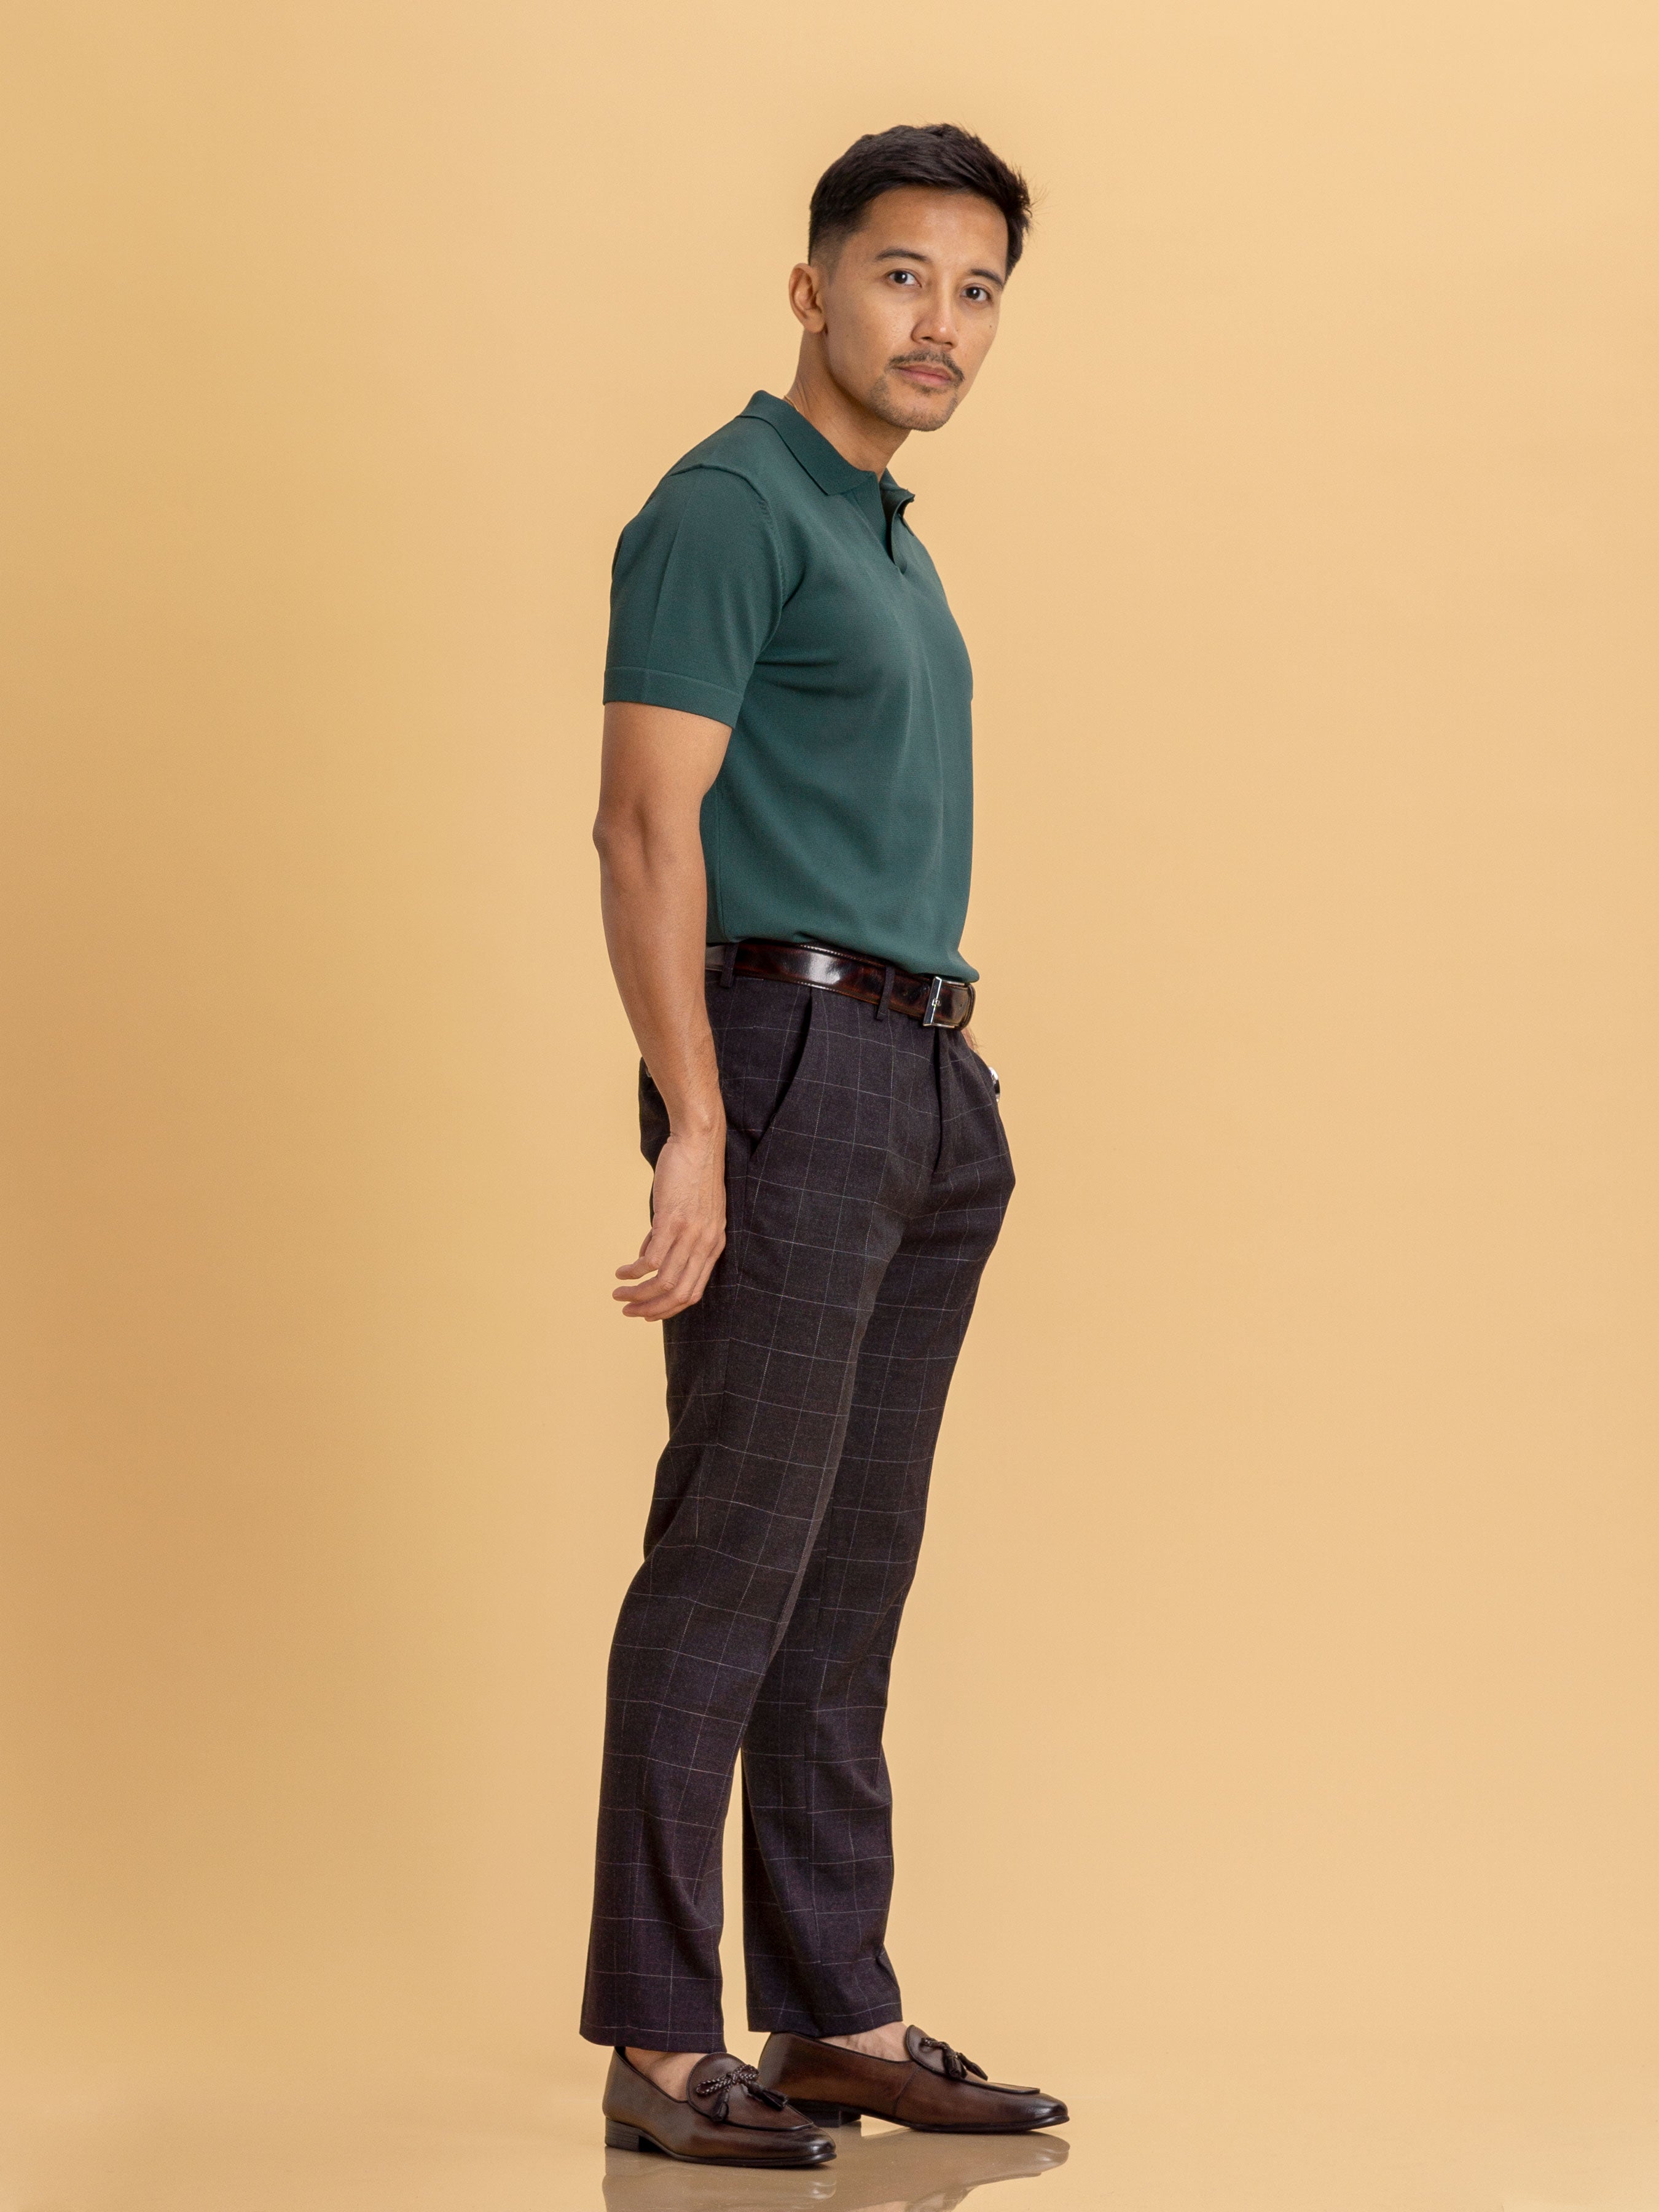 Knit Polo Tee - Emerald Green Open Collar - Zeve Shoes